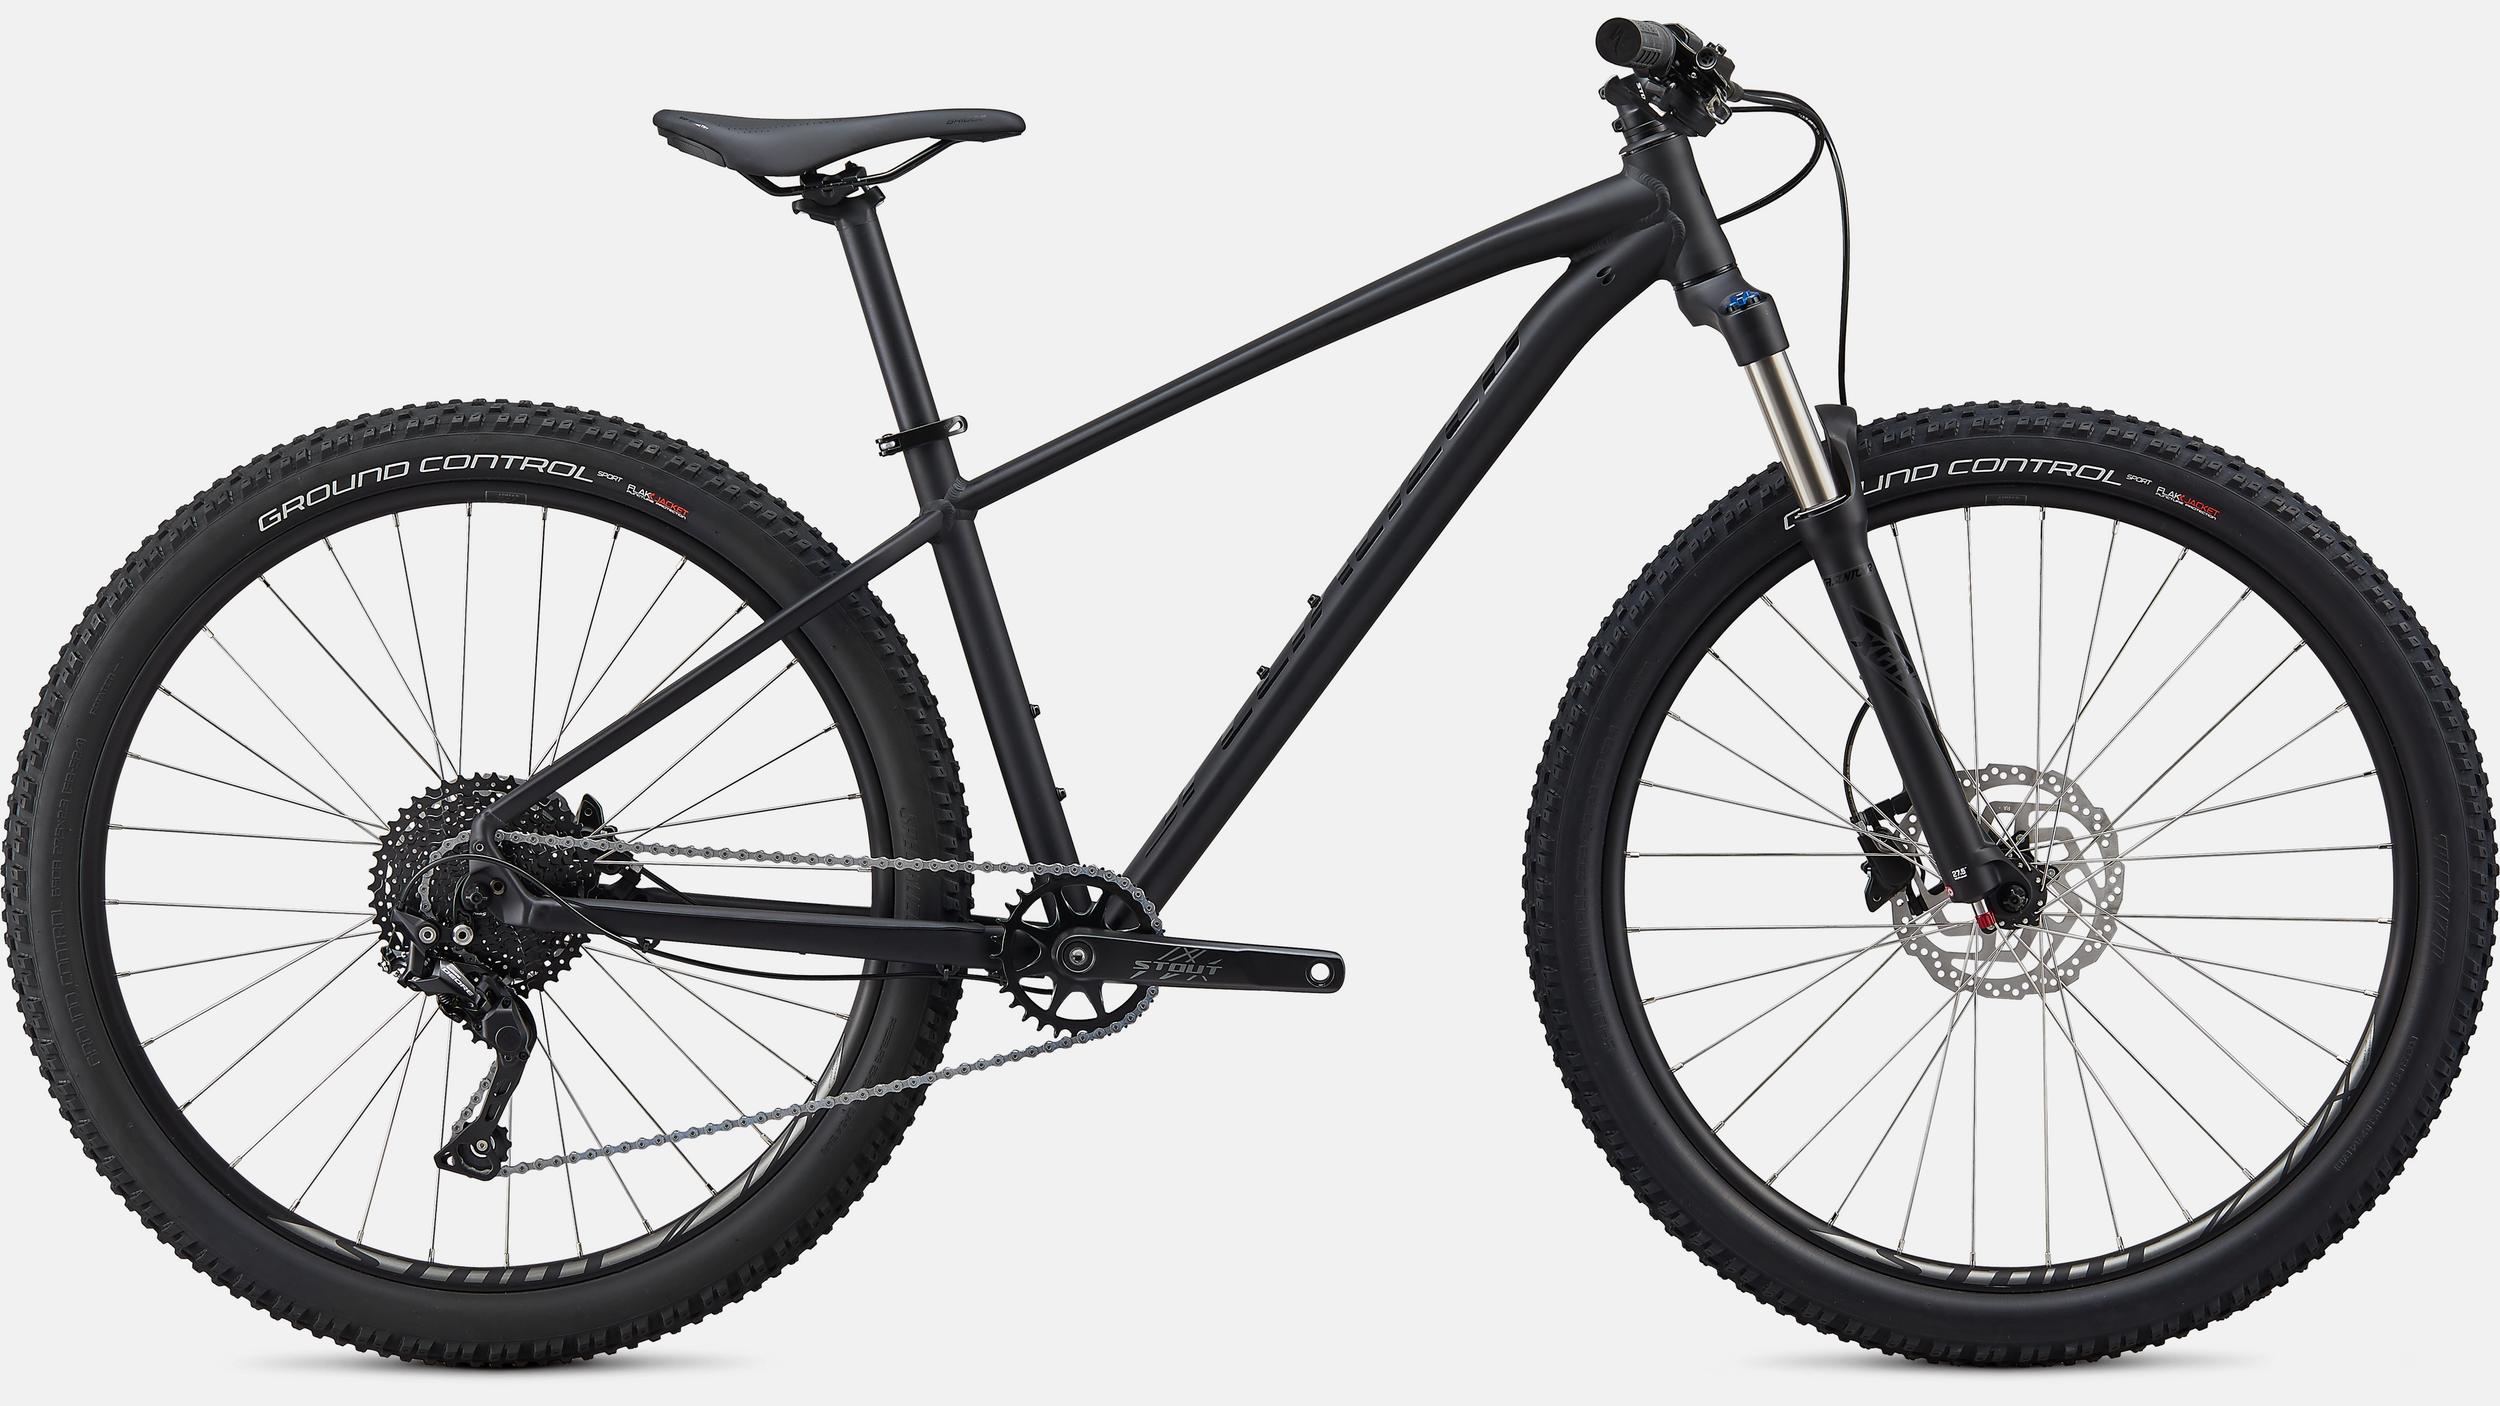 Paint for 2020 Specialized Pitch Expert 1X - Satin Black